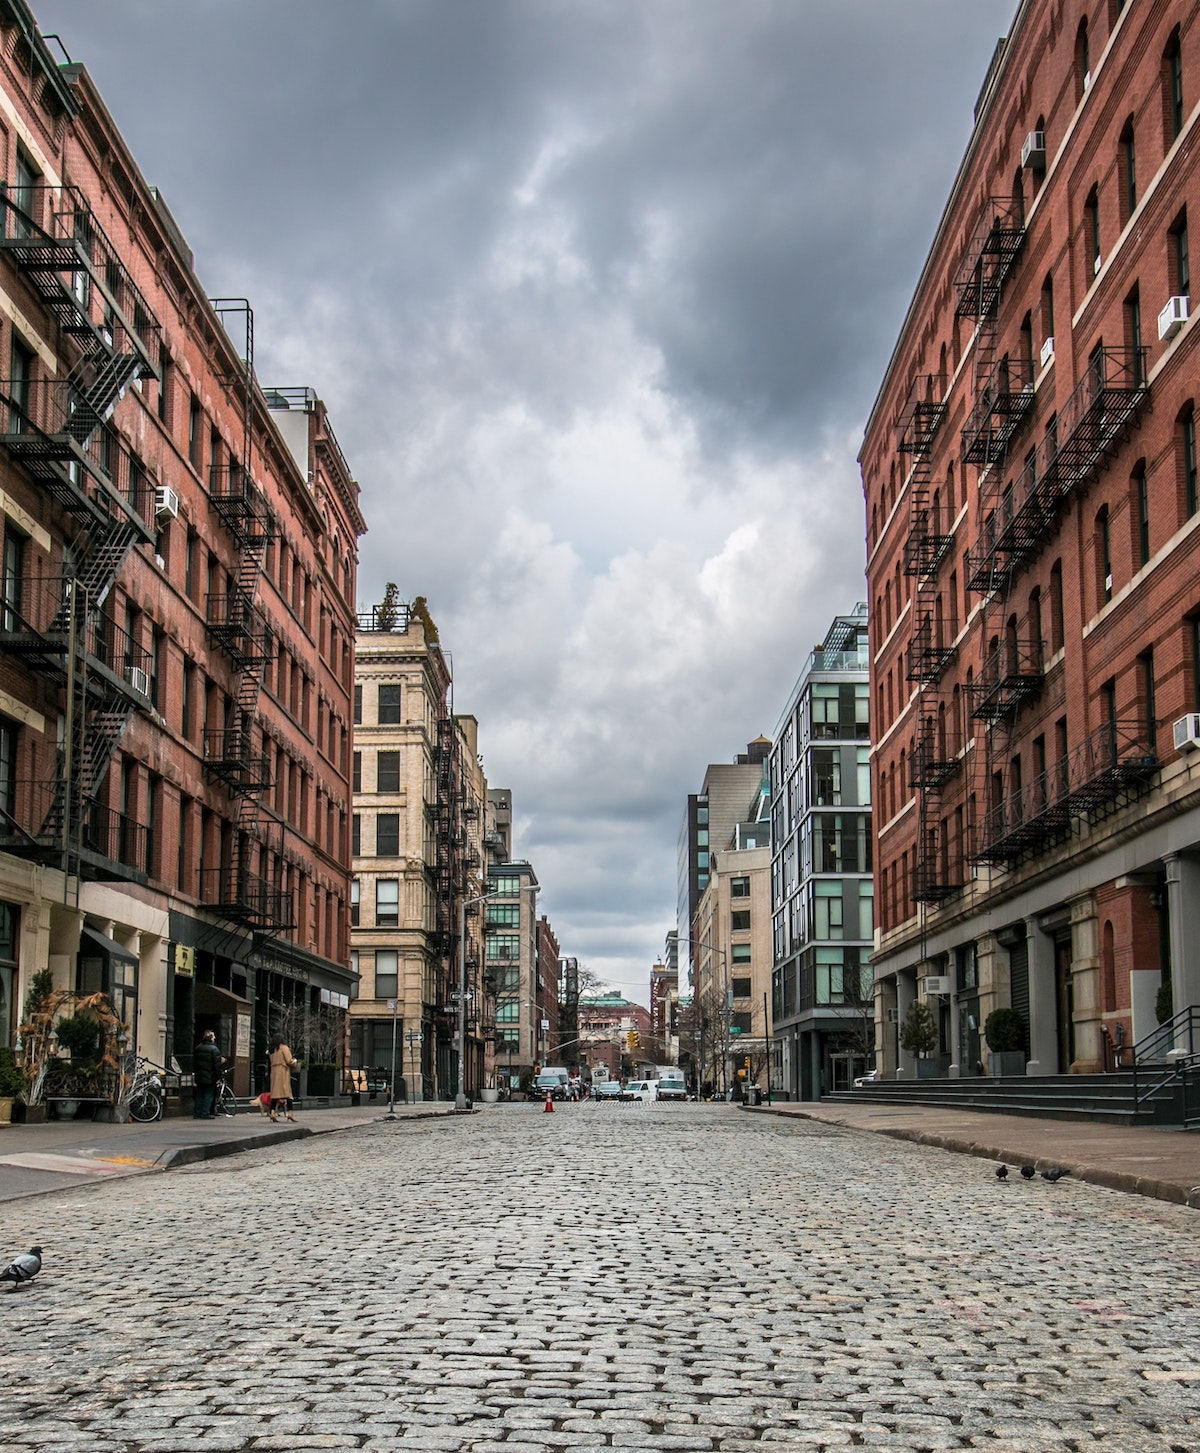 Cobblestone street lined by multi-story brick buildings on an overcast day